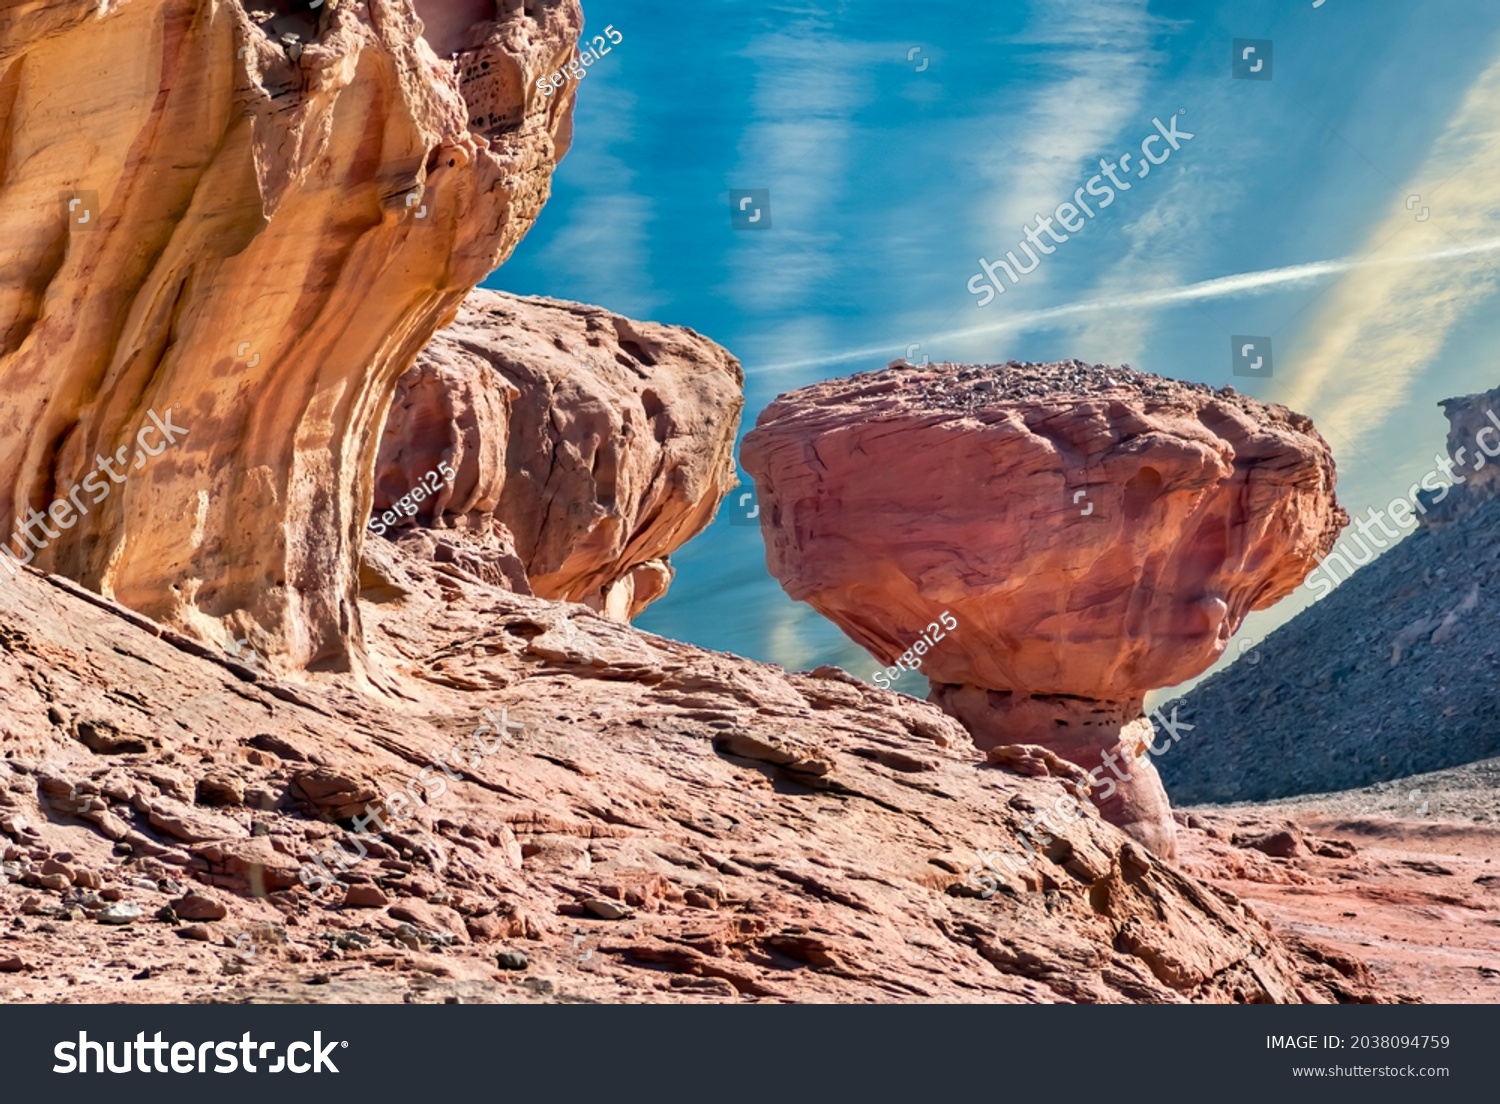 Stone mushroom is a unique geological formation from Jurassic period in Timna park that is located 25 km north of Eilat – famous tourist resort city in Israel. Focus on geological monument #2038094759